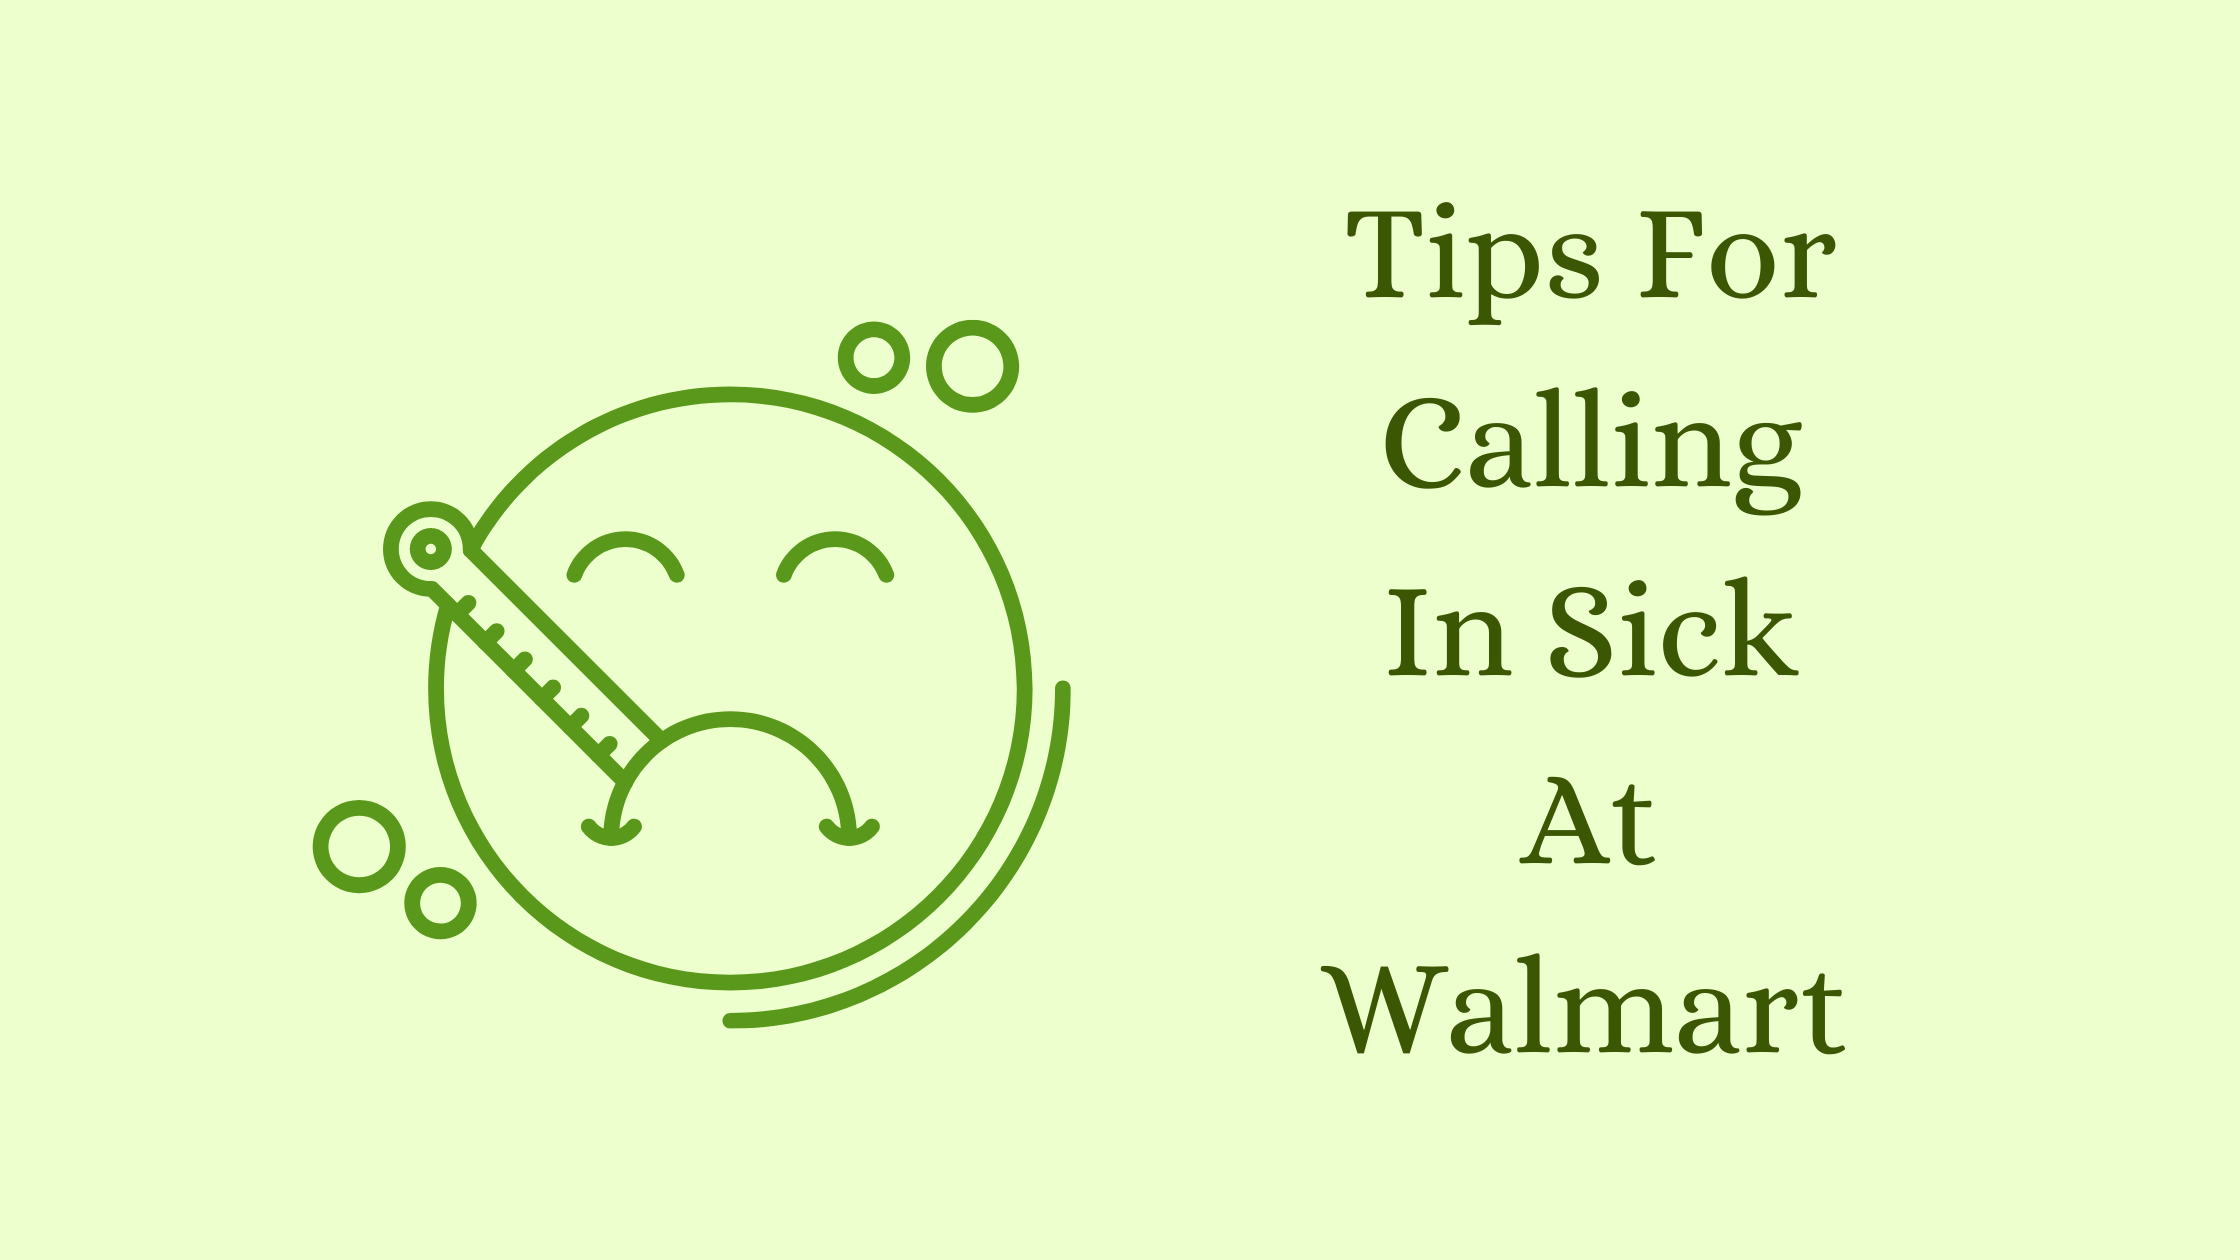 Tips For Calling In Sick At Walmart